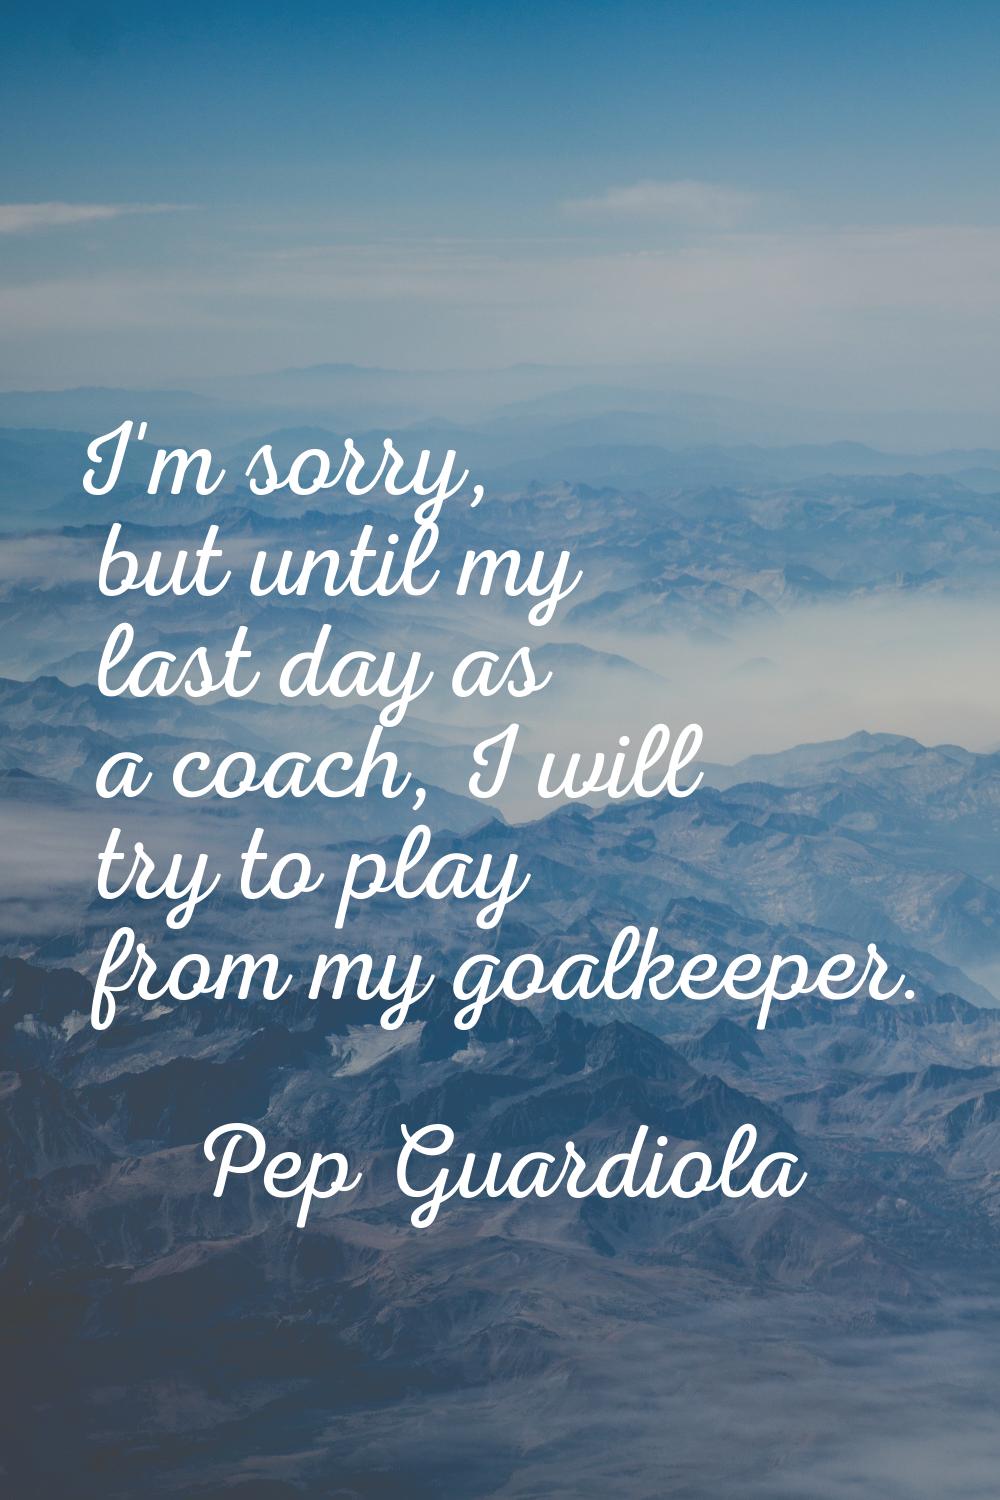 I'm sorry, but until my last day as a coach, I will try to play from my goalkeeper.